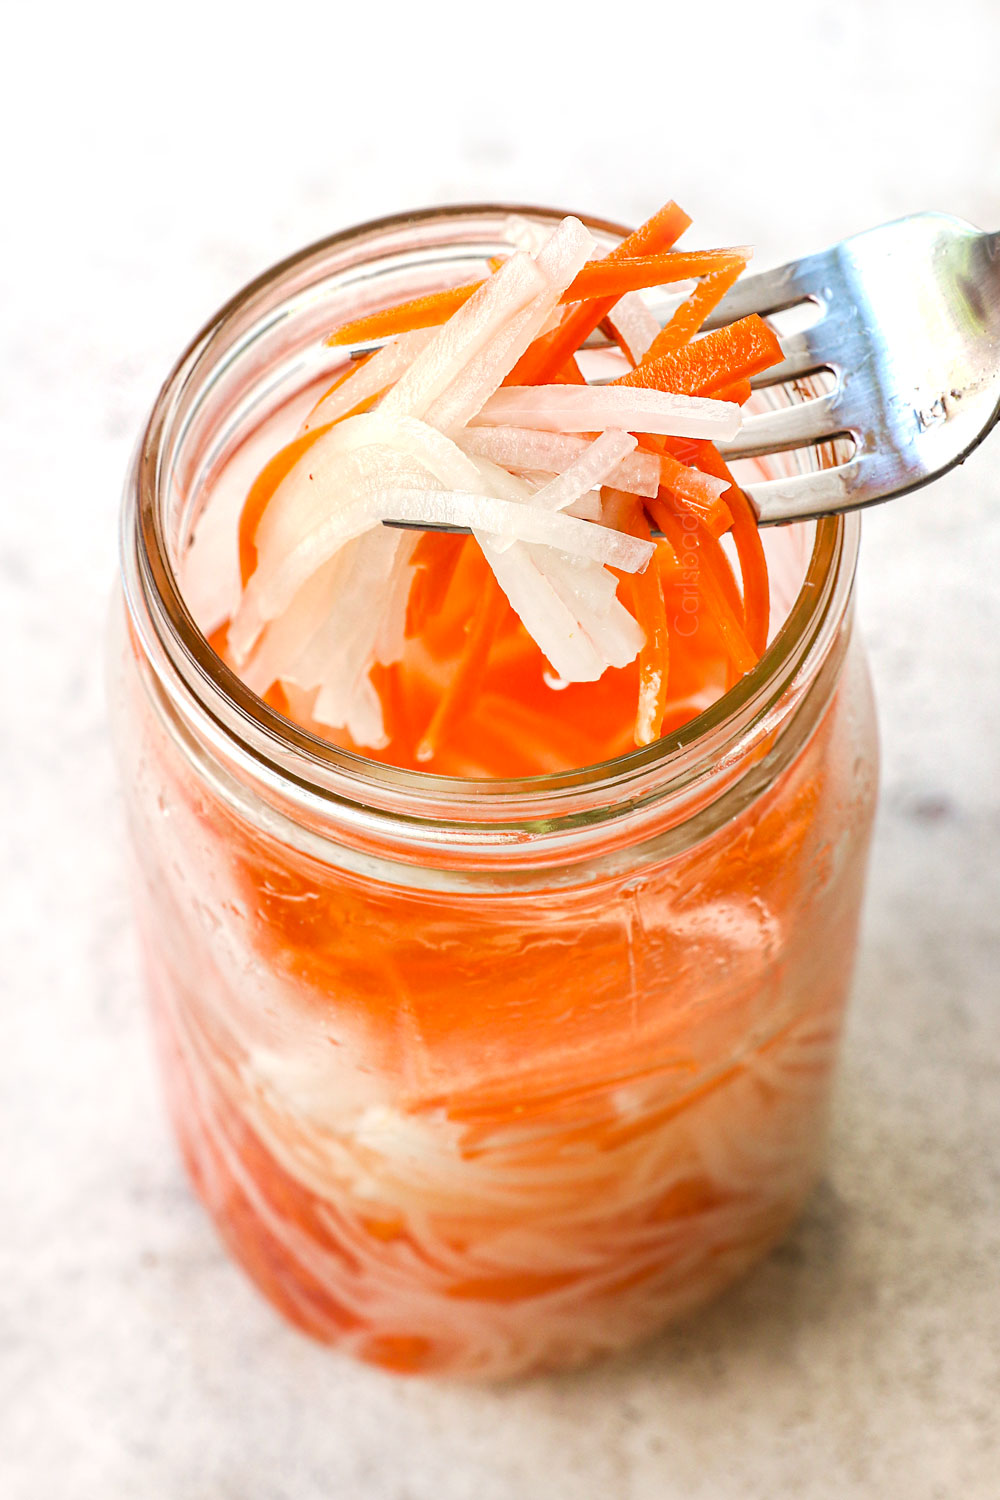 showing how to make banh mi sandwich recipe by pickling matchstick carrots and daikon in rice vinegar and sugar